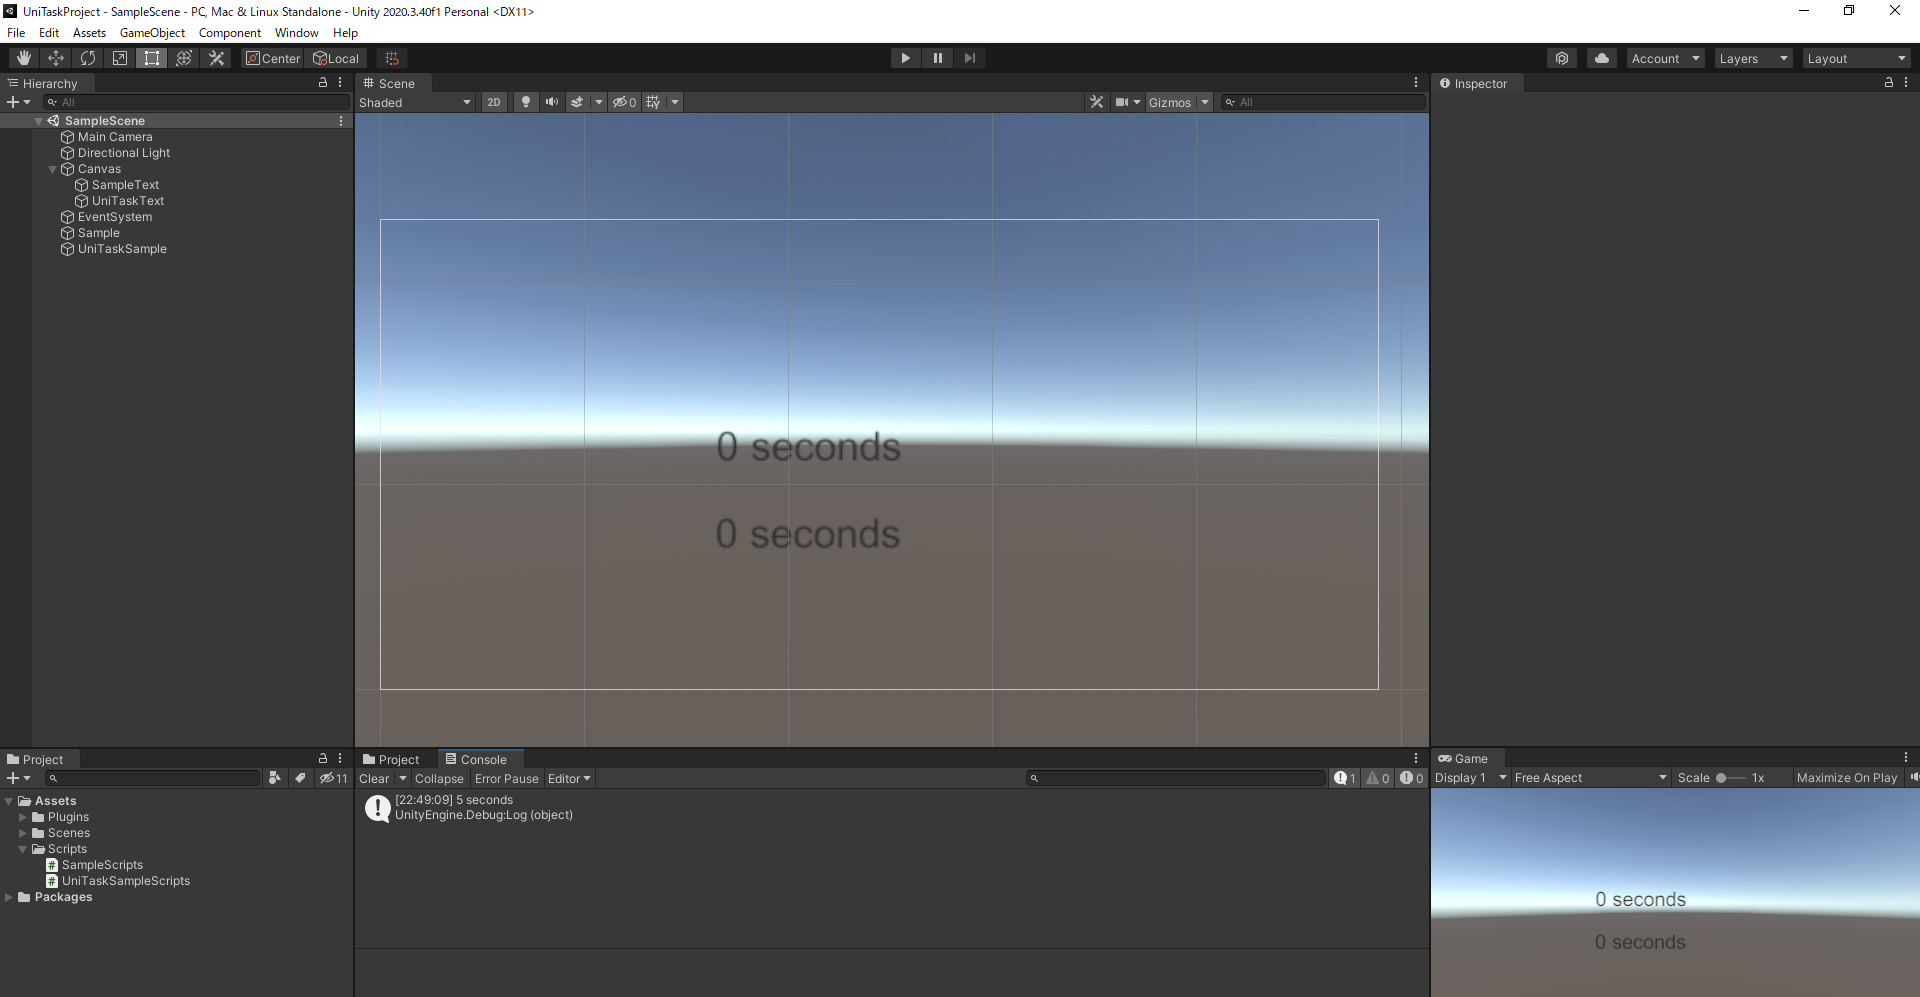 UniTaskProject - SampleScene - PC, Mac & Linux Standalone - Unity 2020.3.40f1 Personal_ DX11 2022_10_09 23_03_51.png